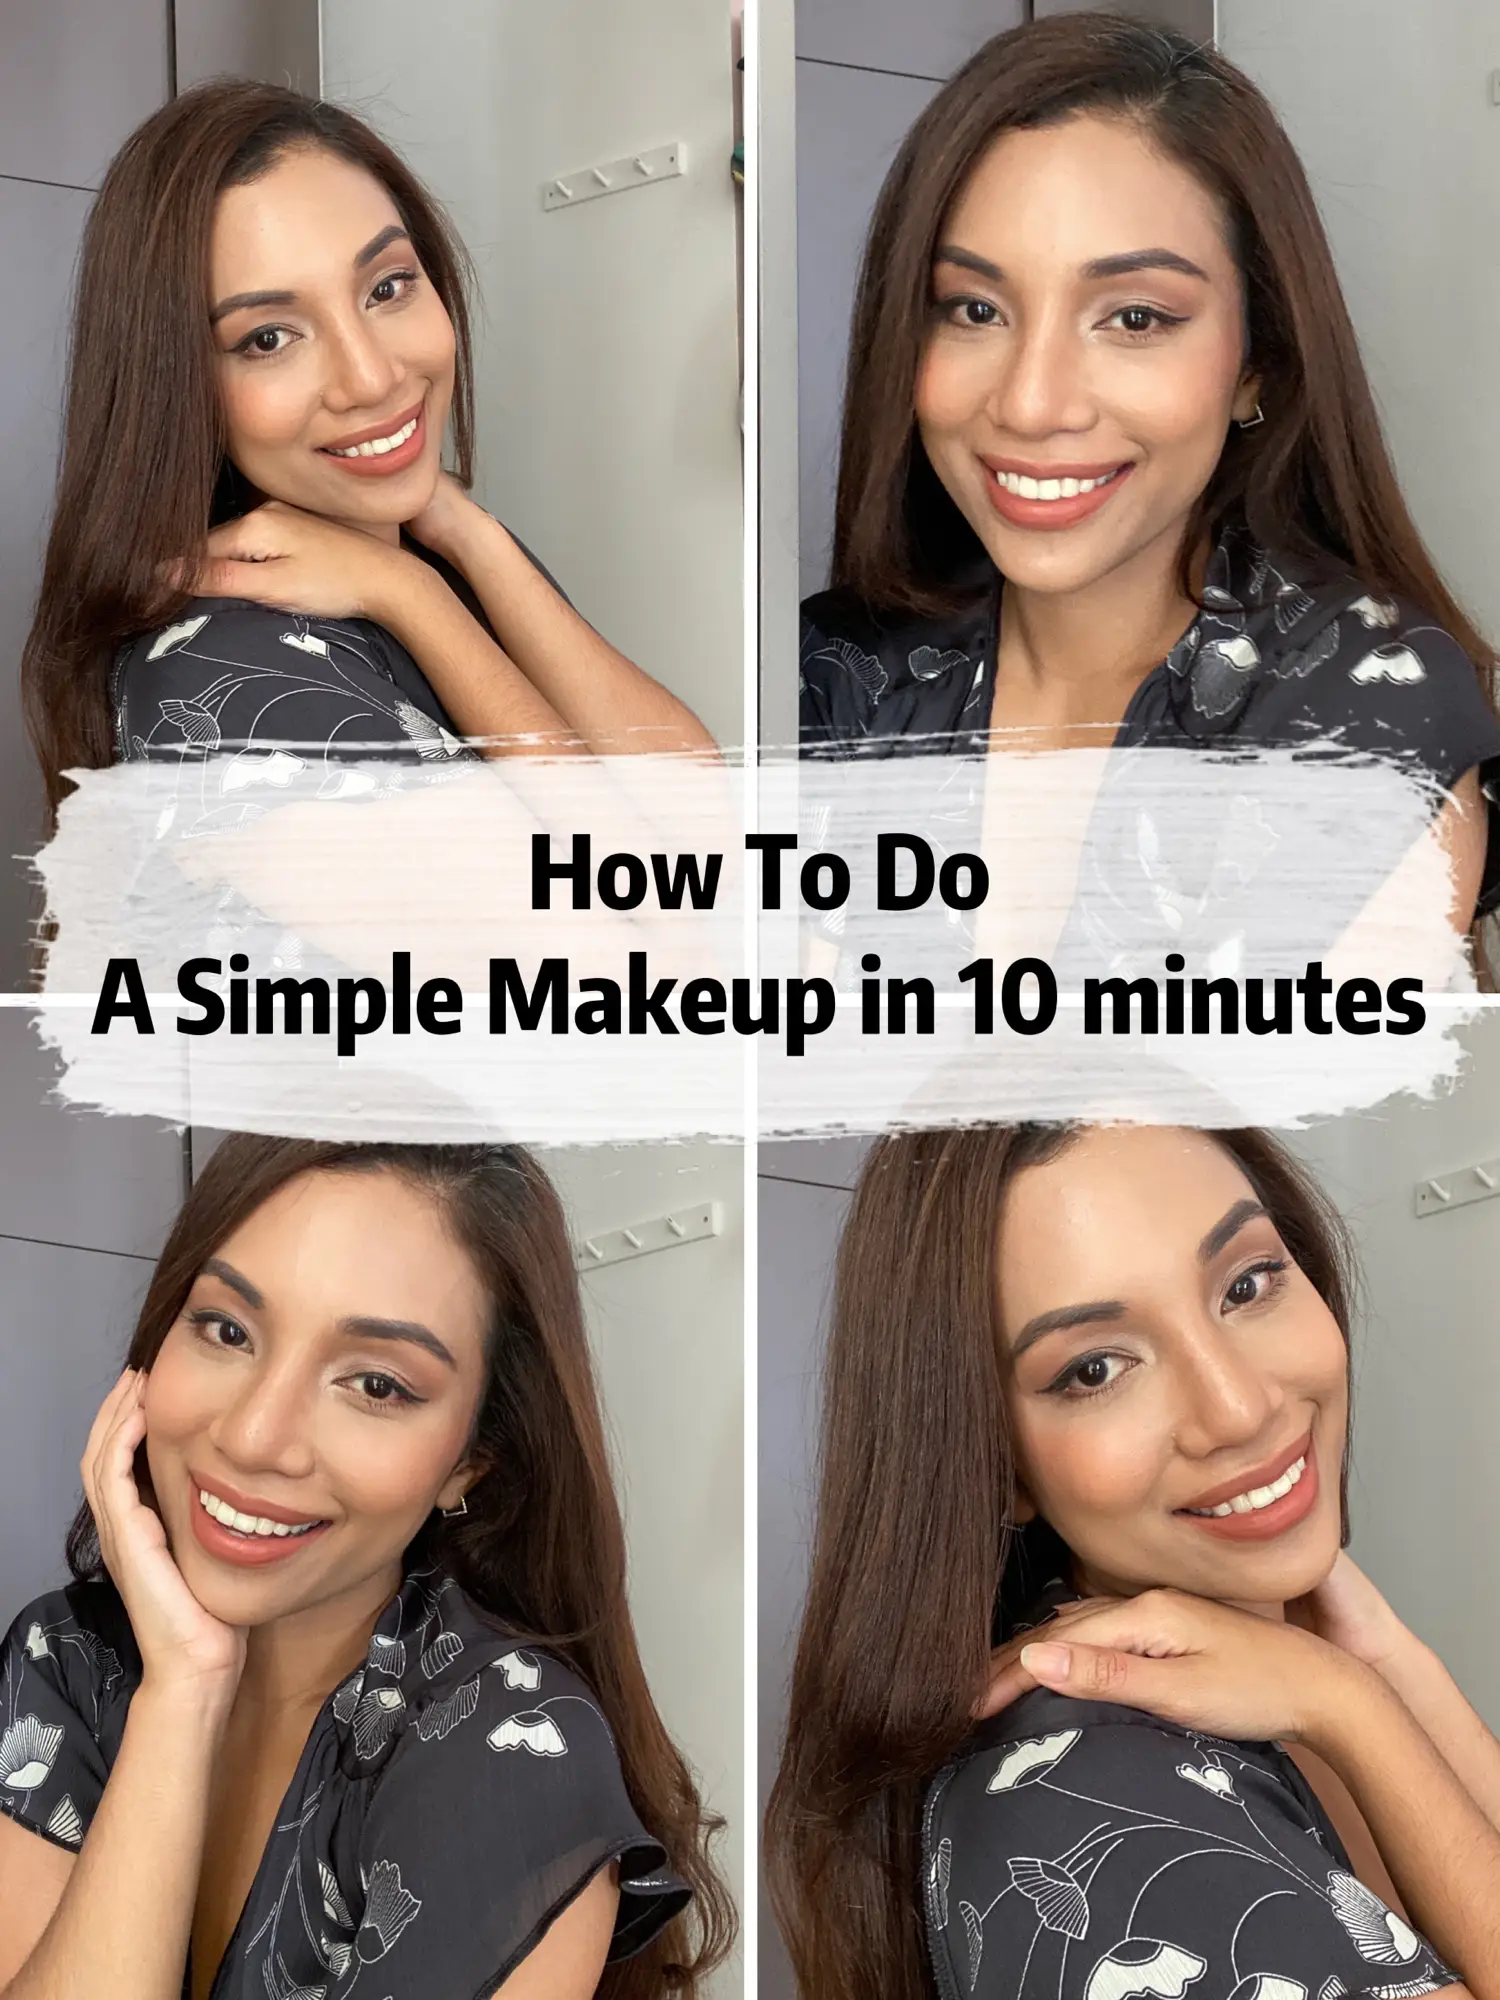 How To Do A Simple Makeup In 10 Minutes